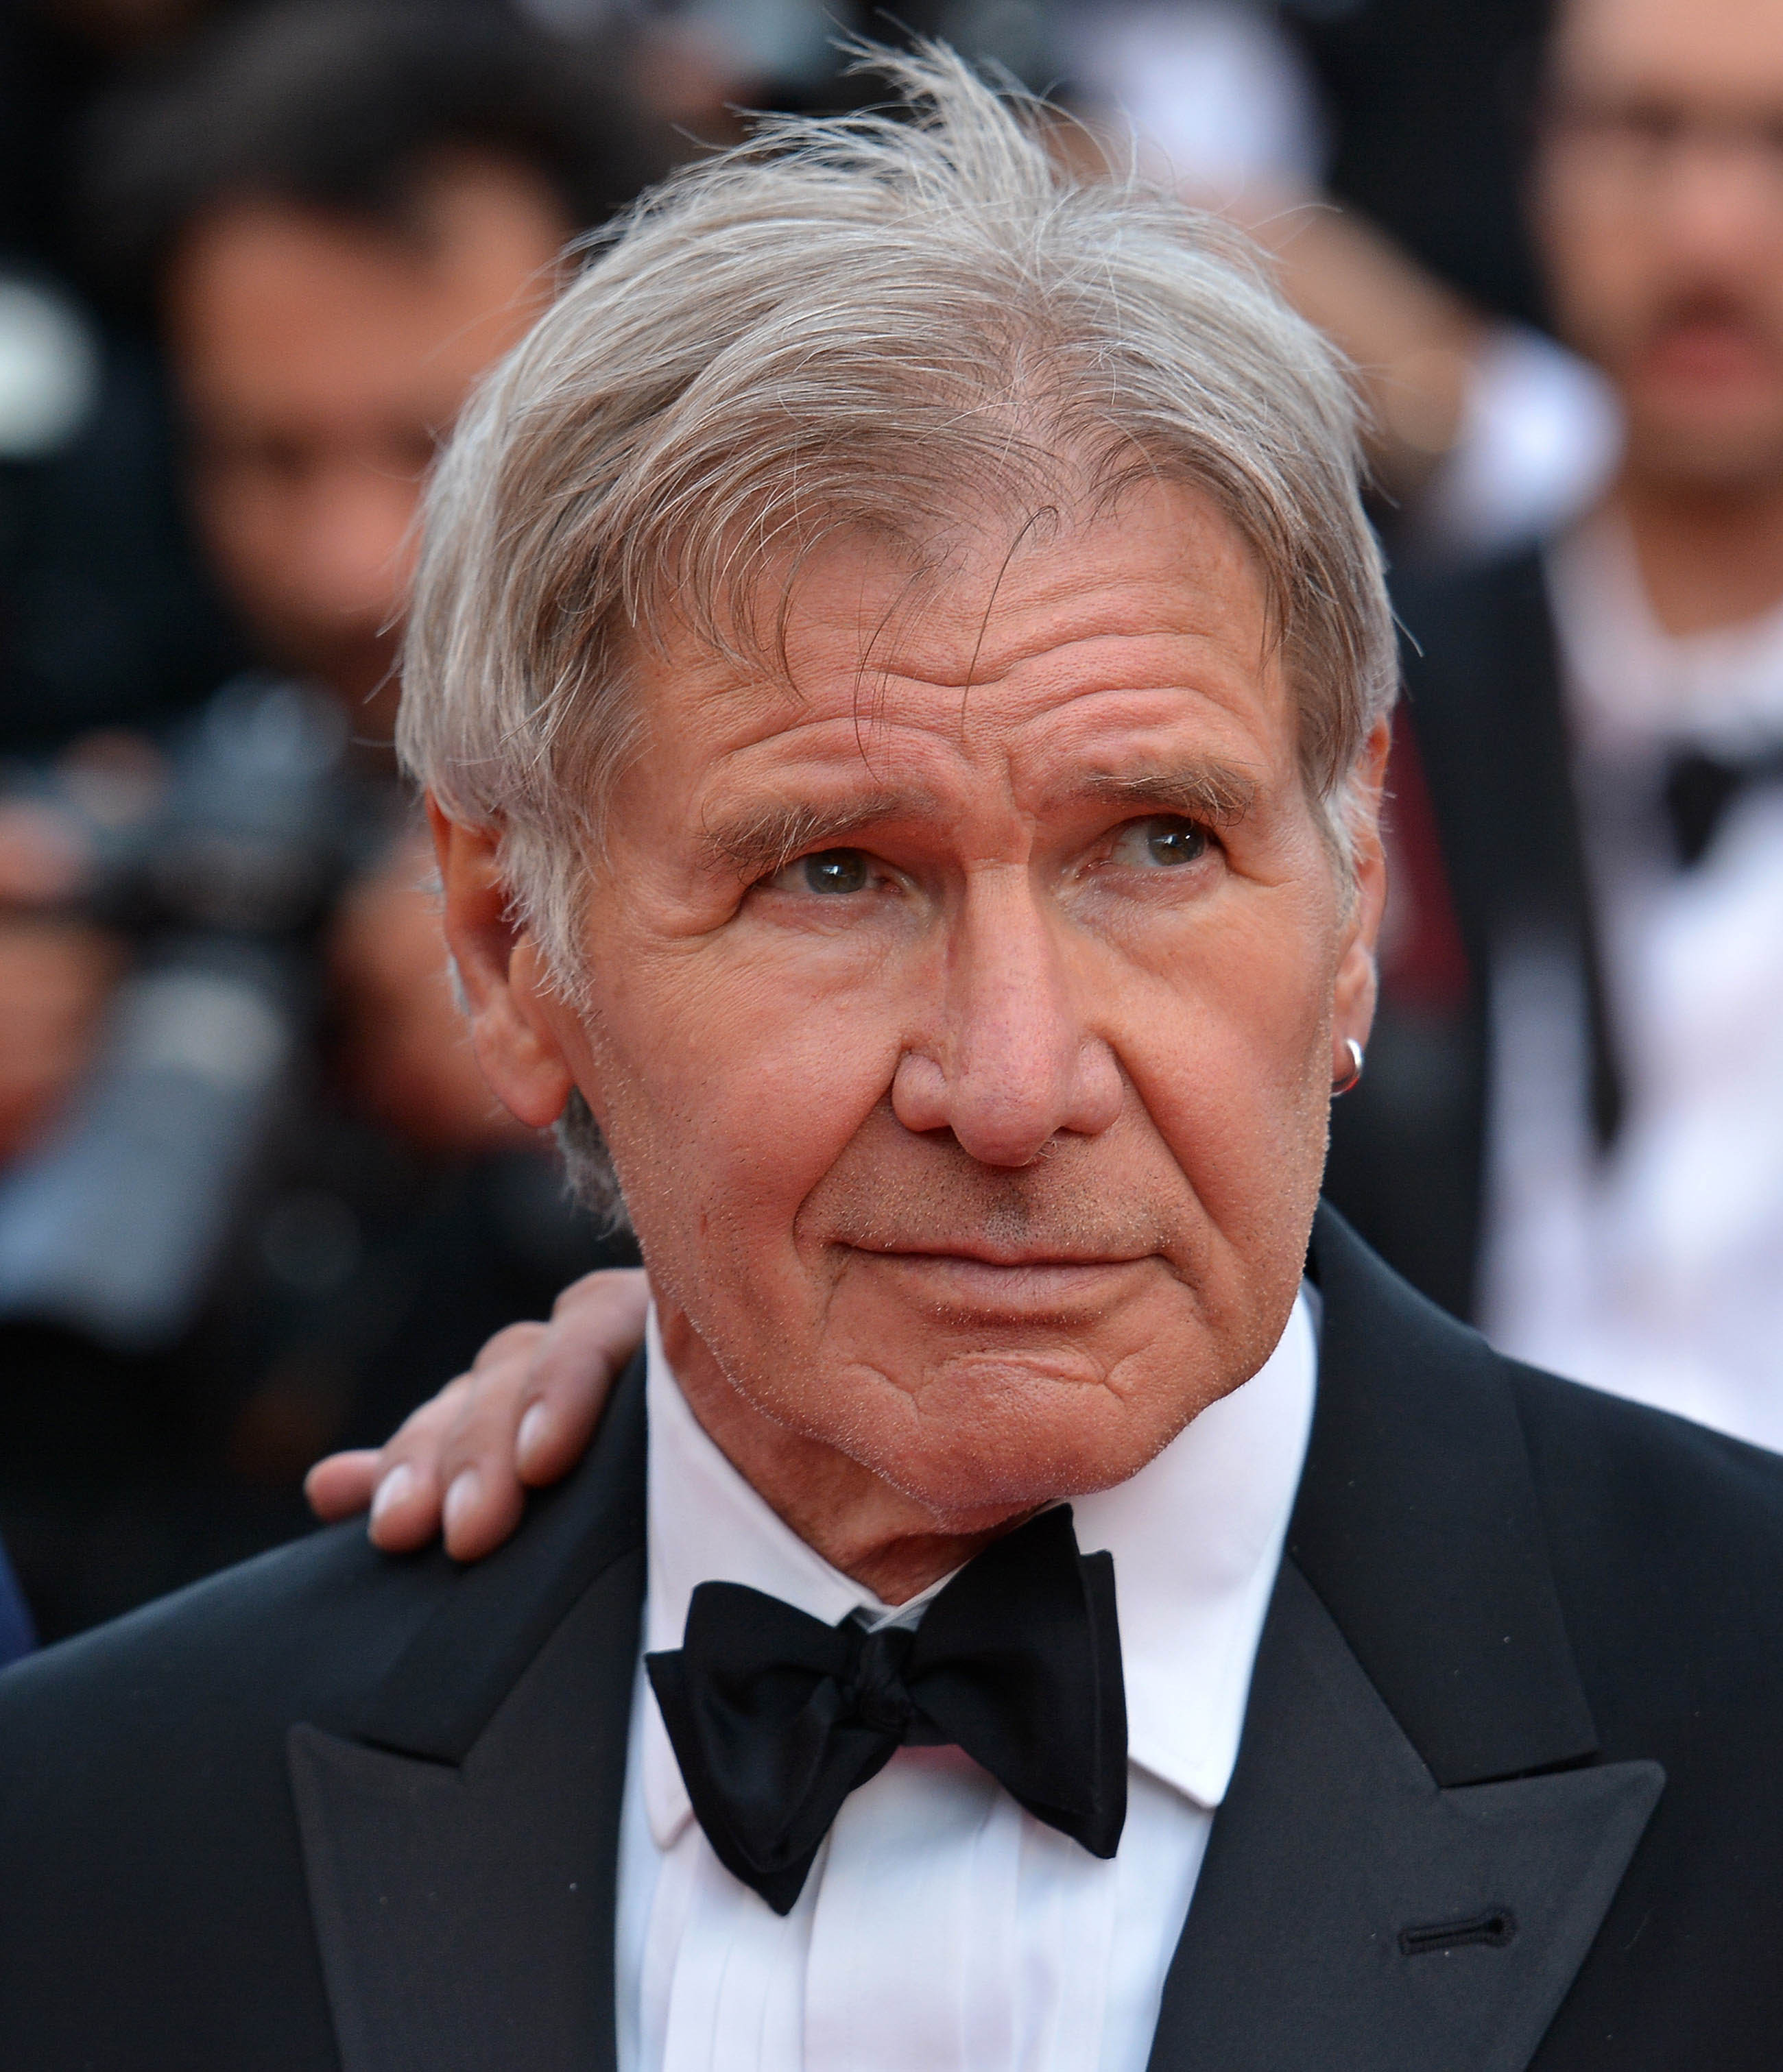 Harrison Ford  arrives for the screening of the film 'The Homesman' at the 67th Cannes Film Festival in Cannes, France, May 18, 2014. (Mustafa Yalcin—Anadolu Agency/Getty Images)